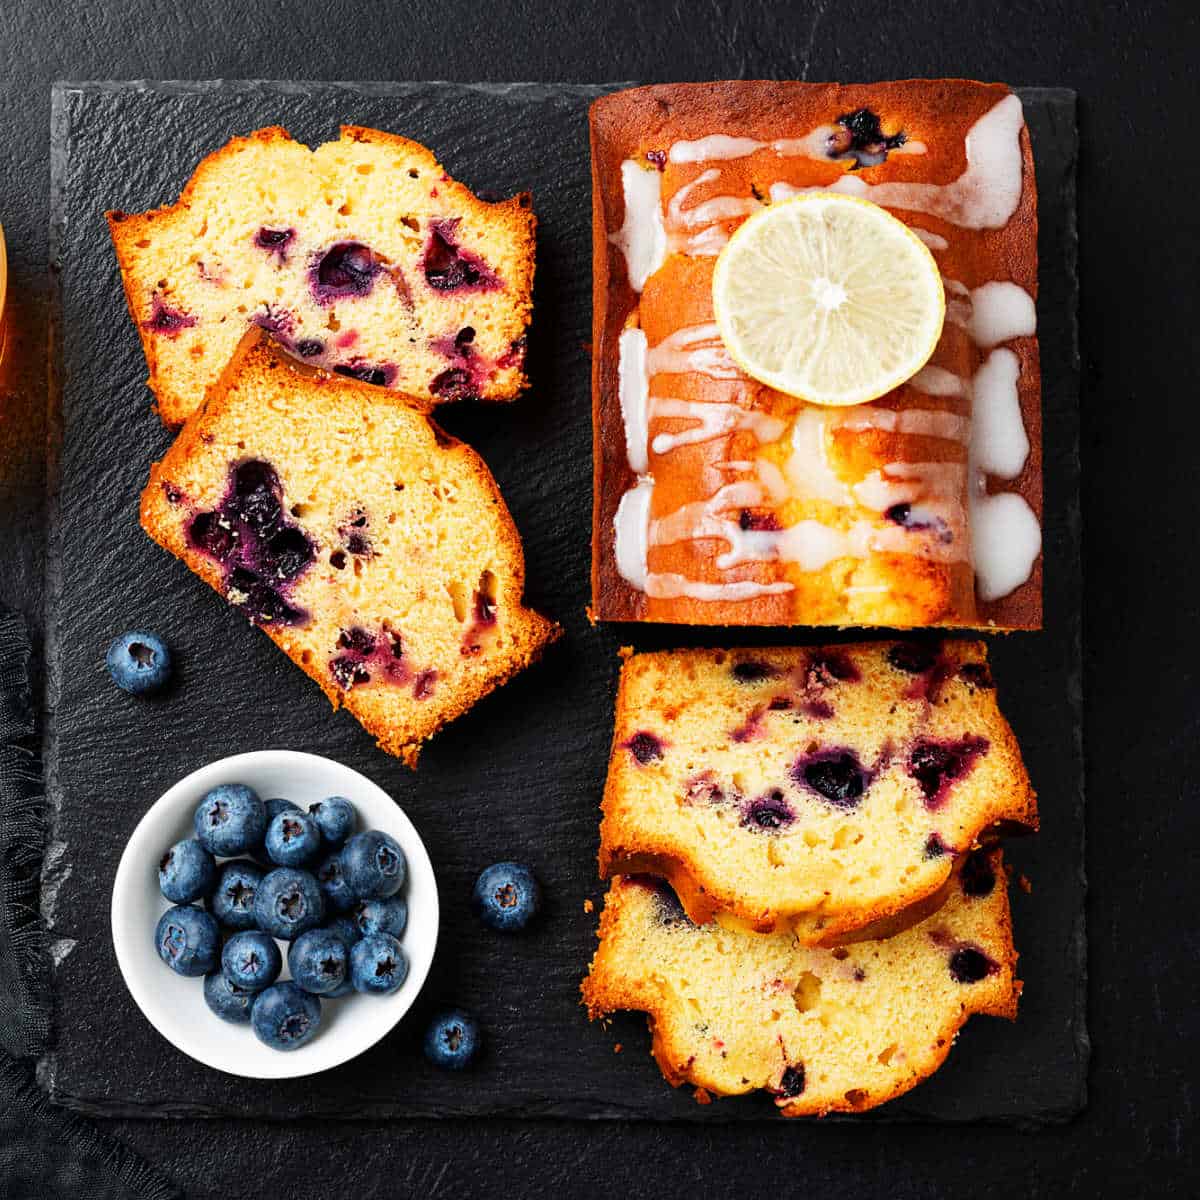 A loaf of blueberry pound cake on a black slate cutting board with cut slices next to it and a white bowl containing fresh blueberries.